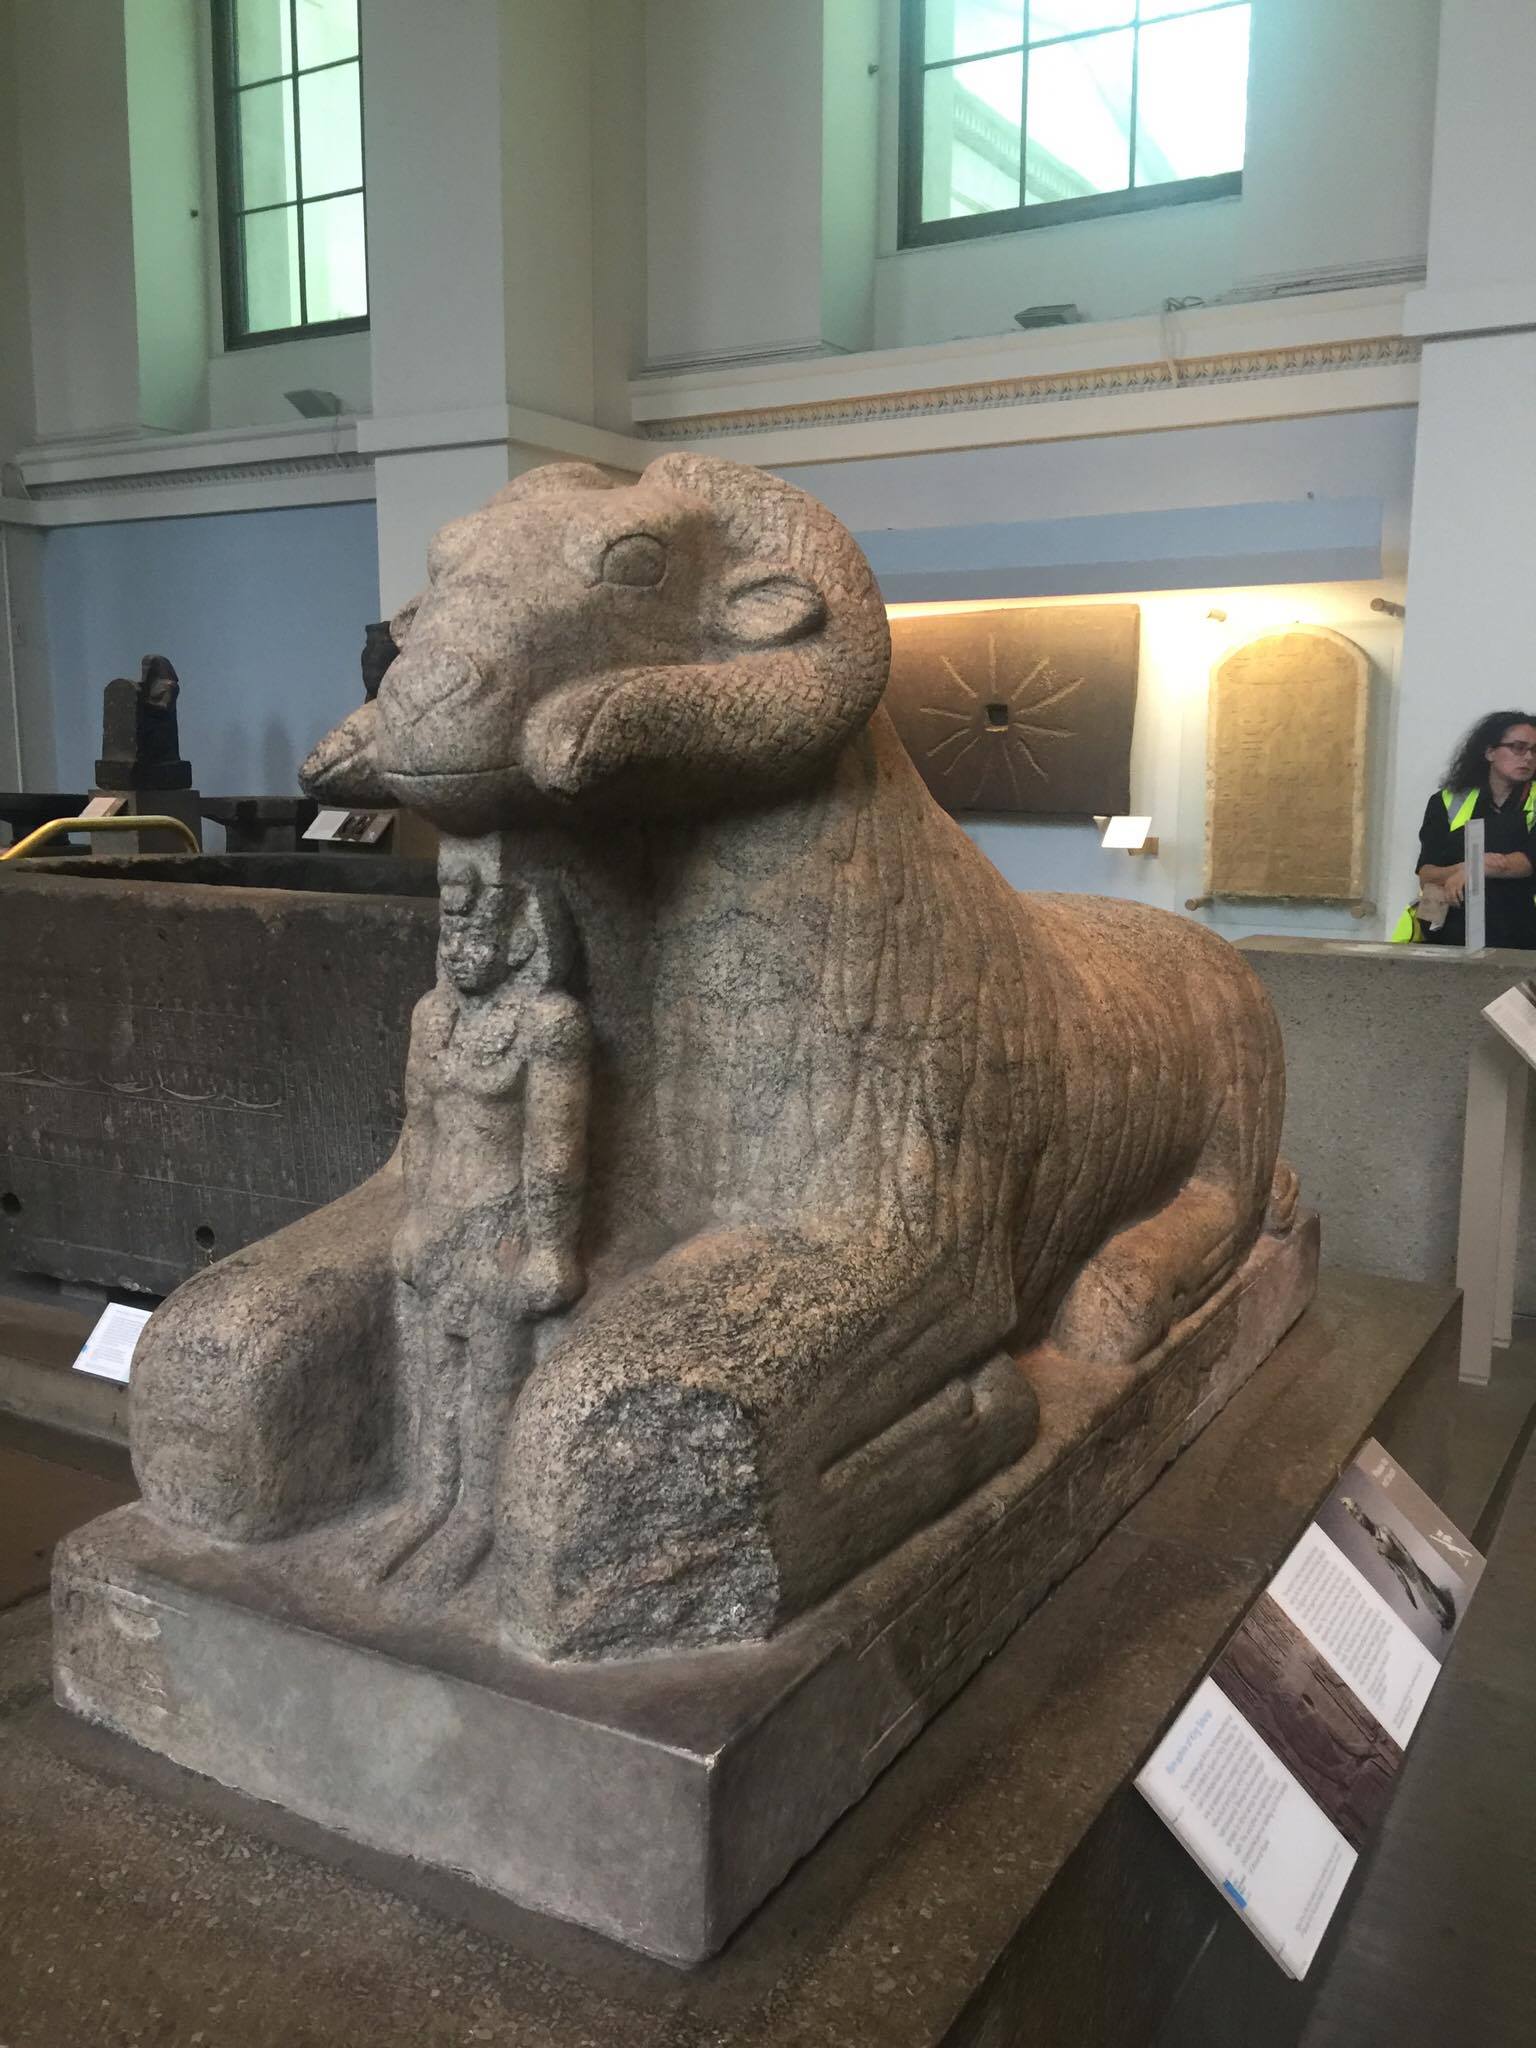 A stone ram in a Sphinx-like position found in the Egyptian area of the British Museum.